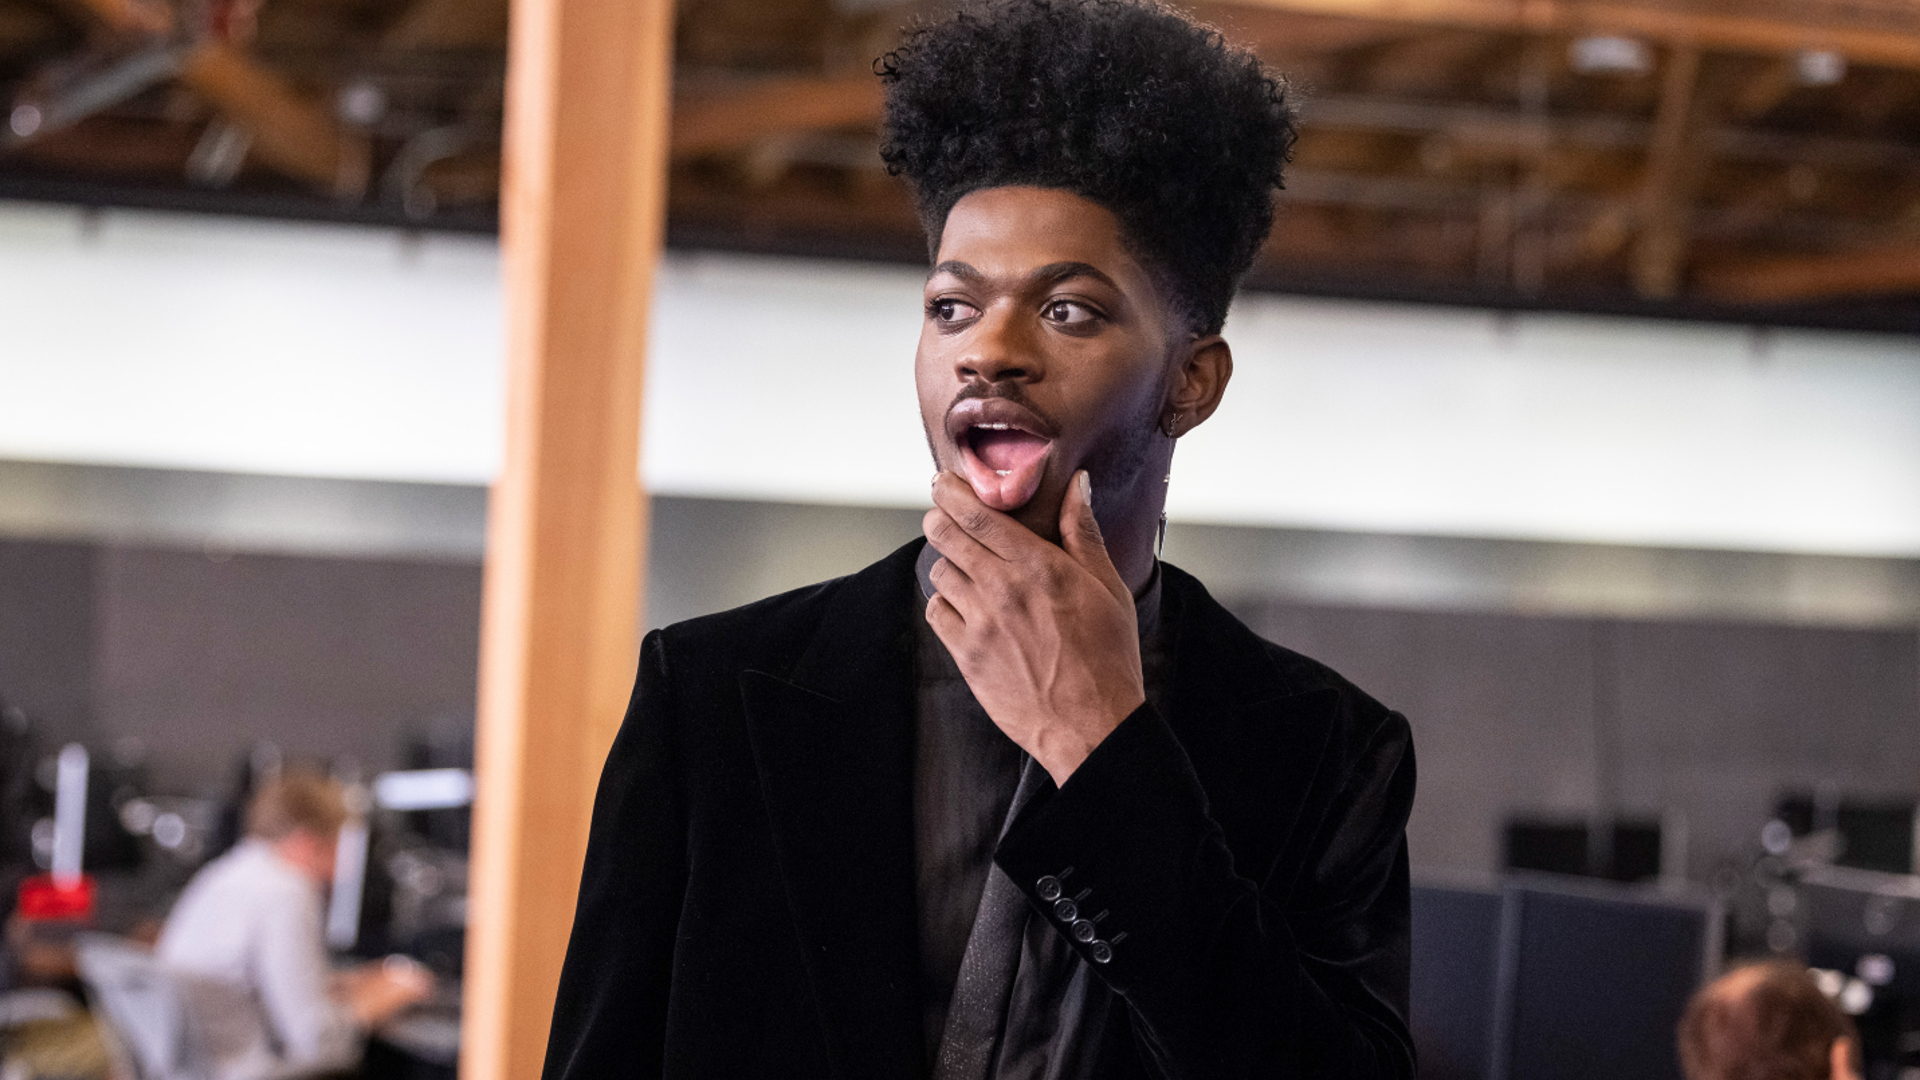 Lil Nas X will be performing at League of Legends Worlds (seriously)